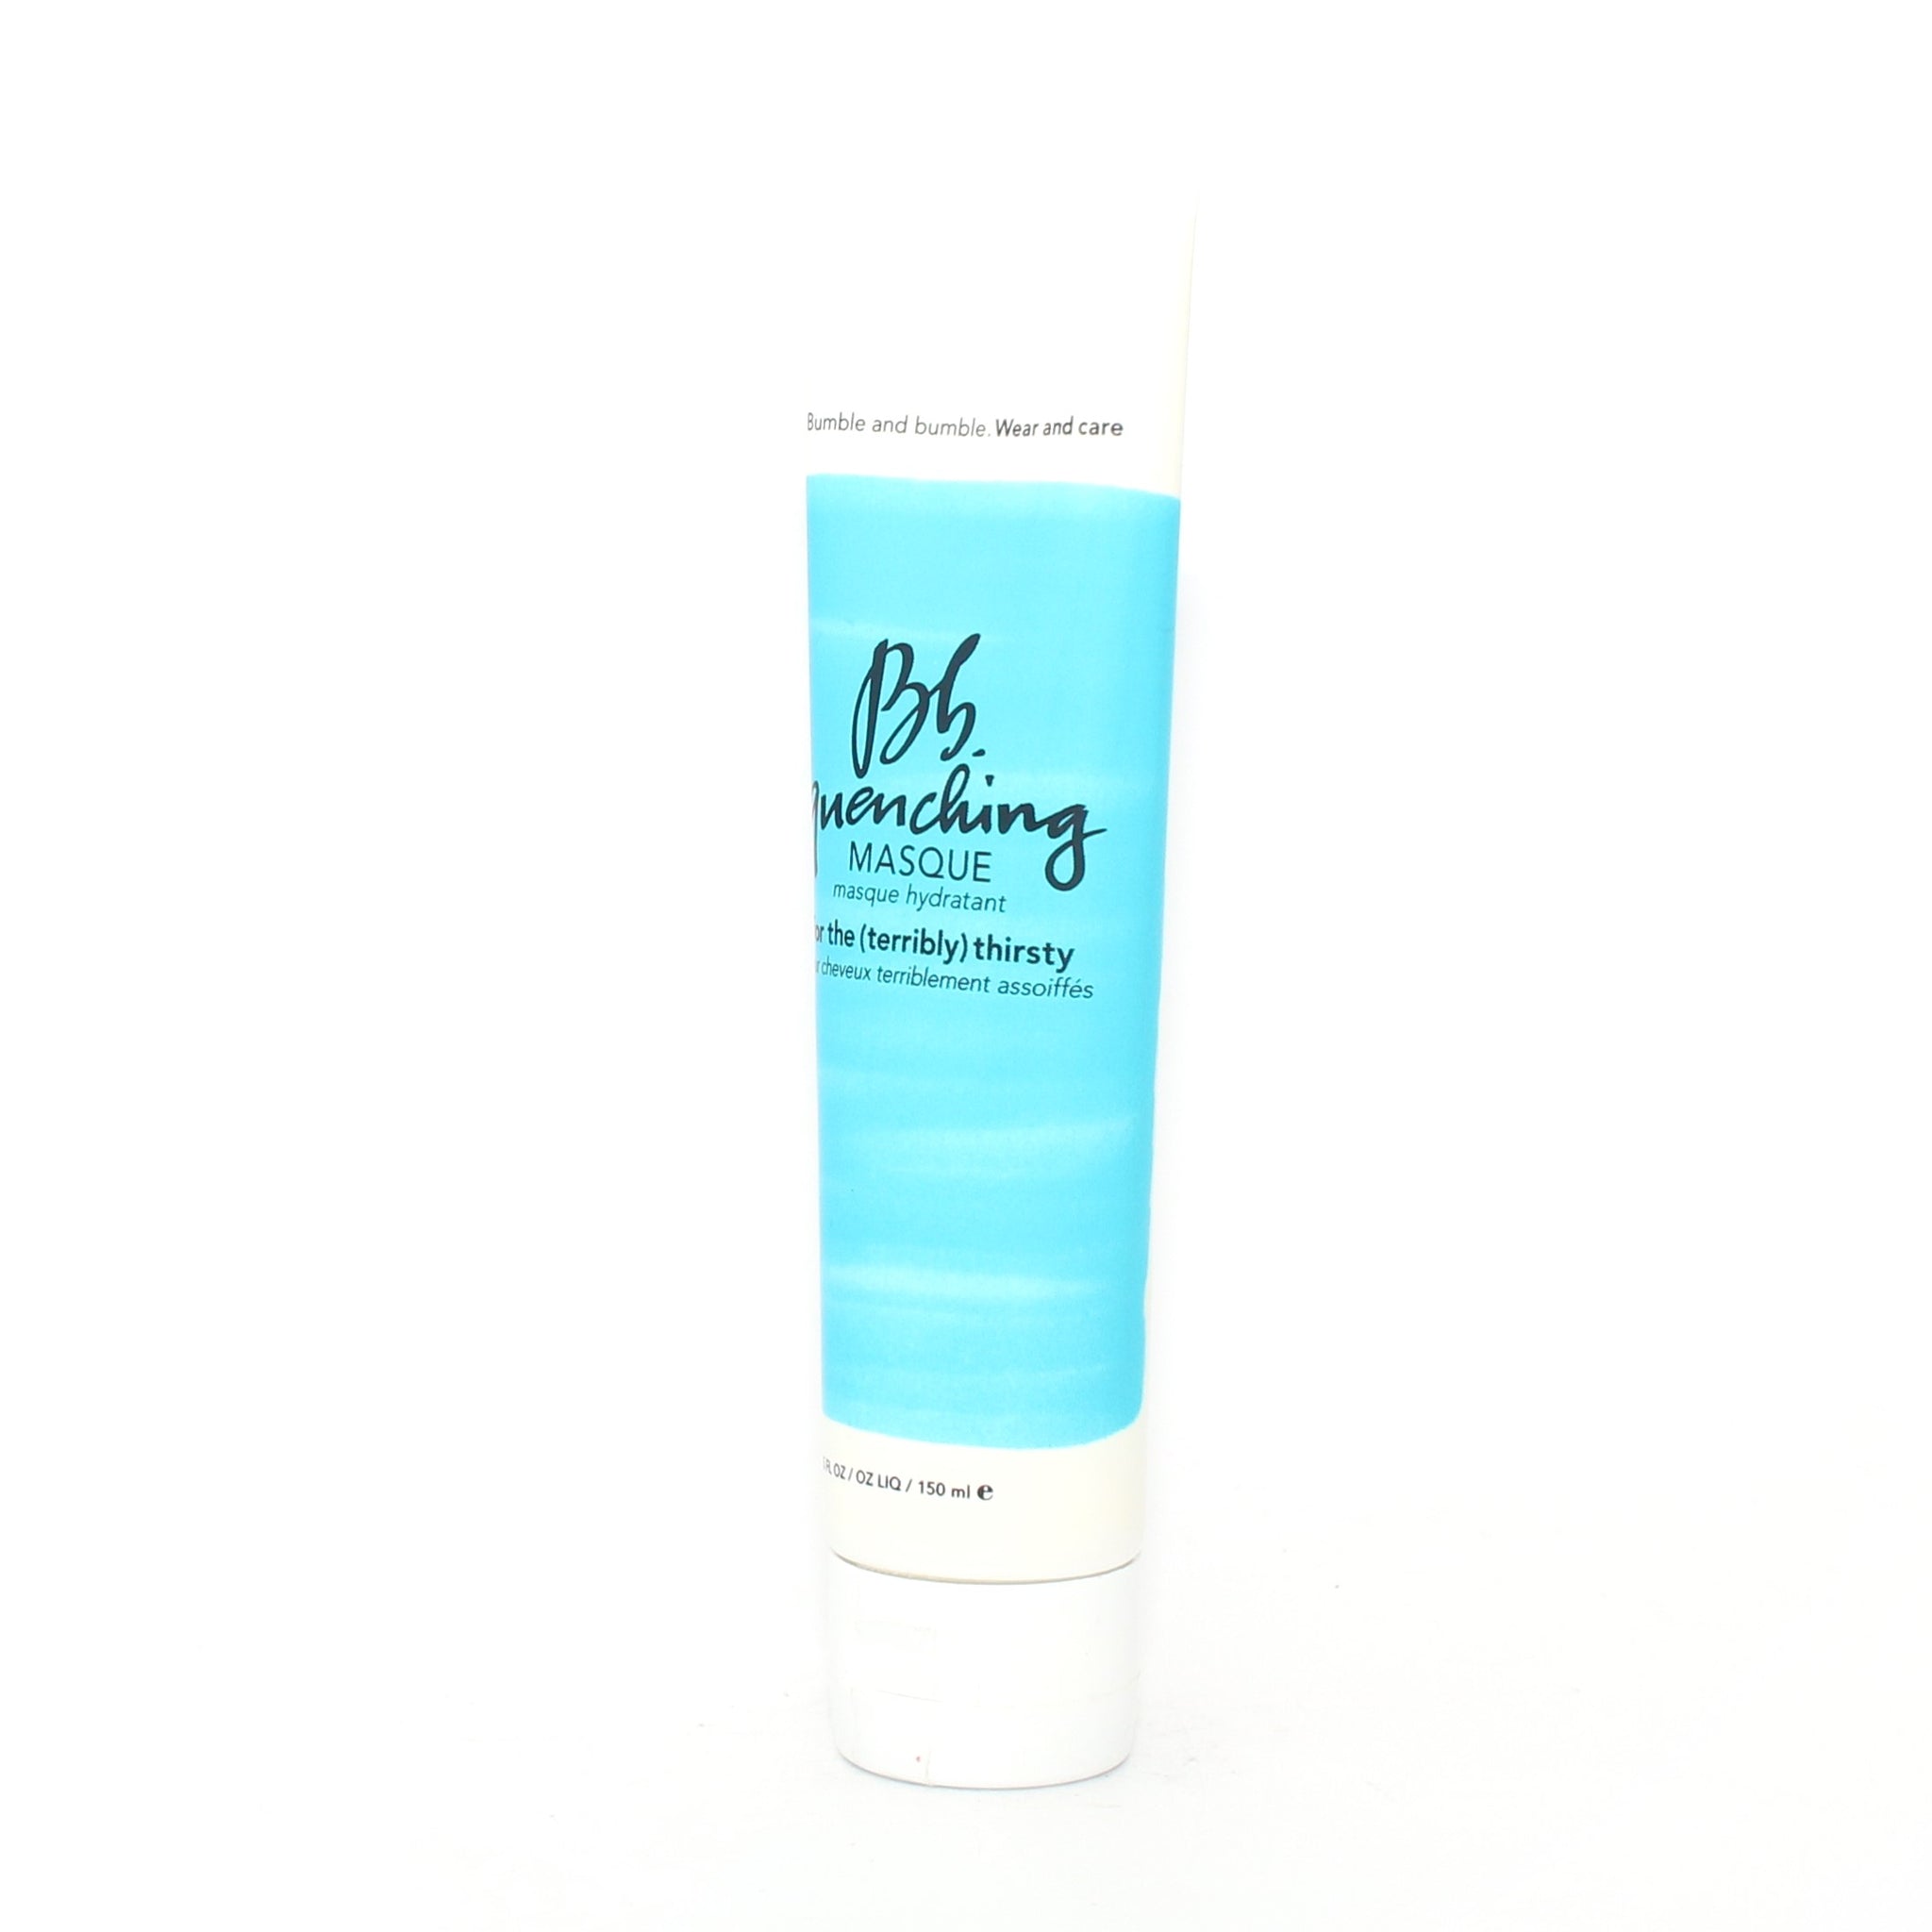 Bumble and Bumble Bb Quenching Masque 5 oz